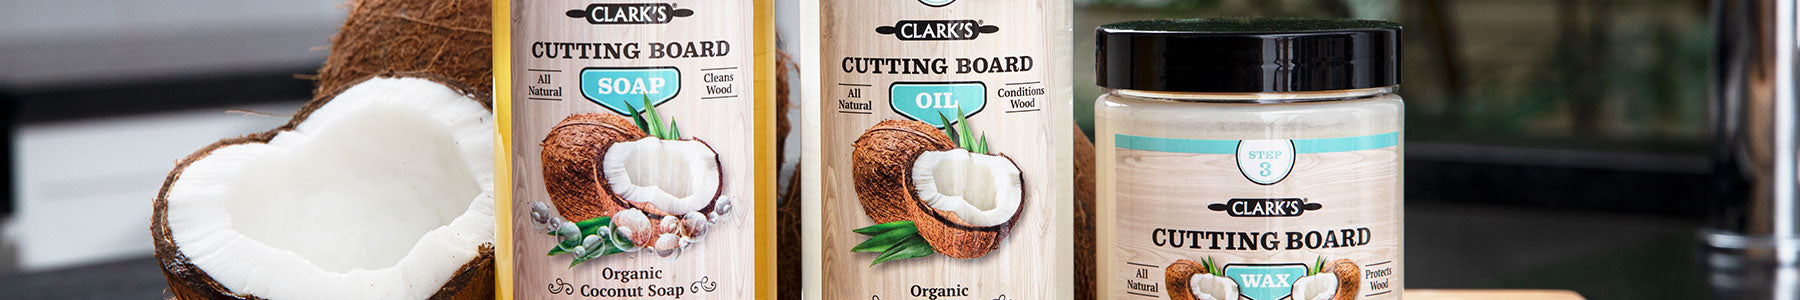 Clark's Cutting Board Refined Coconut Soap - Plant Based Food Safe Castile Soap for Countertops, Butcher Blocks, Bamboo, and Utensils - Cleans and Res